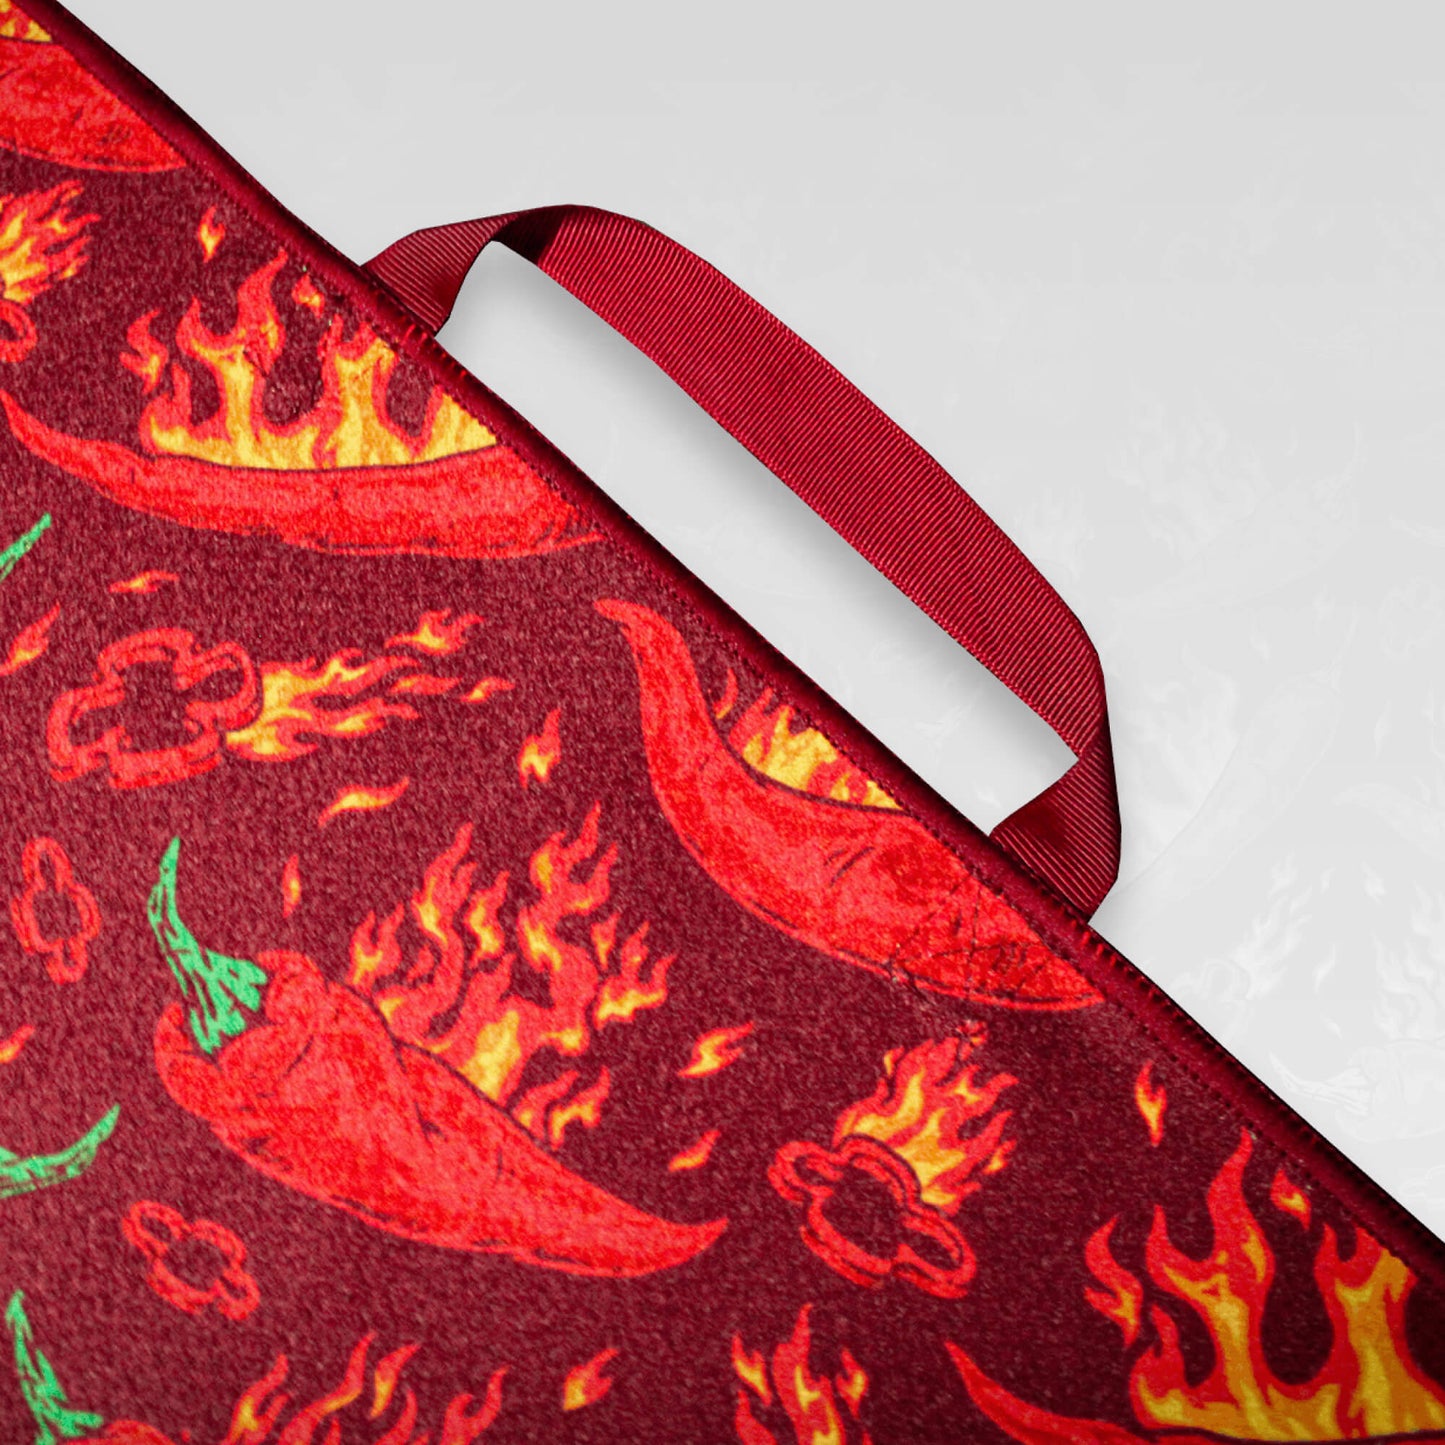 A close up of the handle of a flaming chilli pepper patterned microfibre golf towel